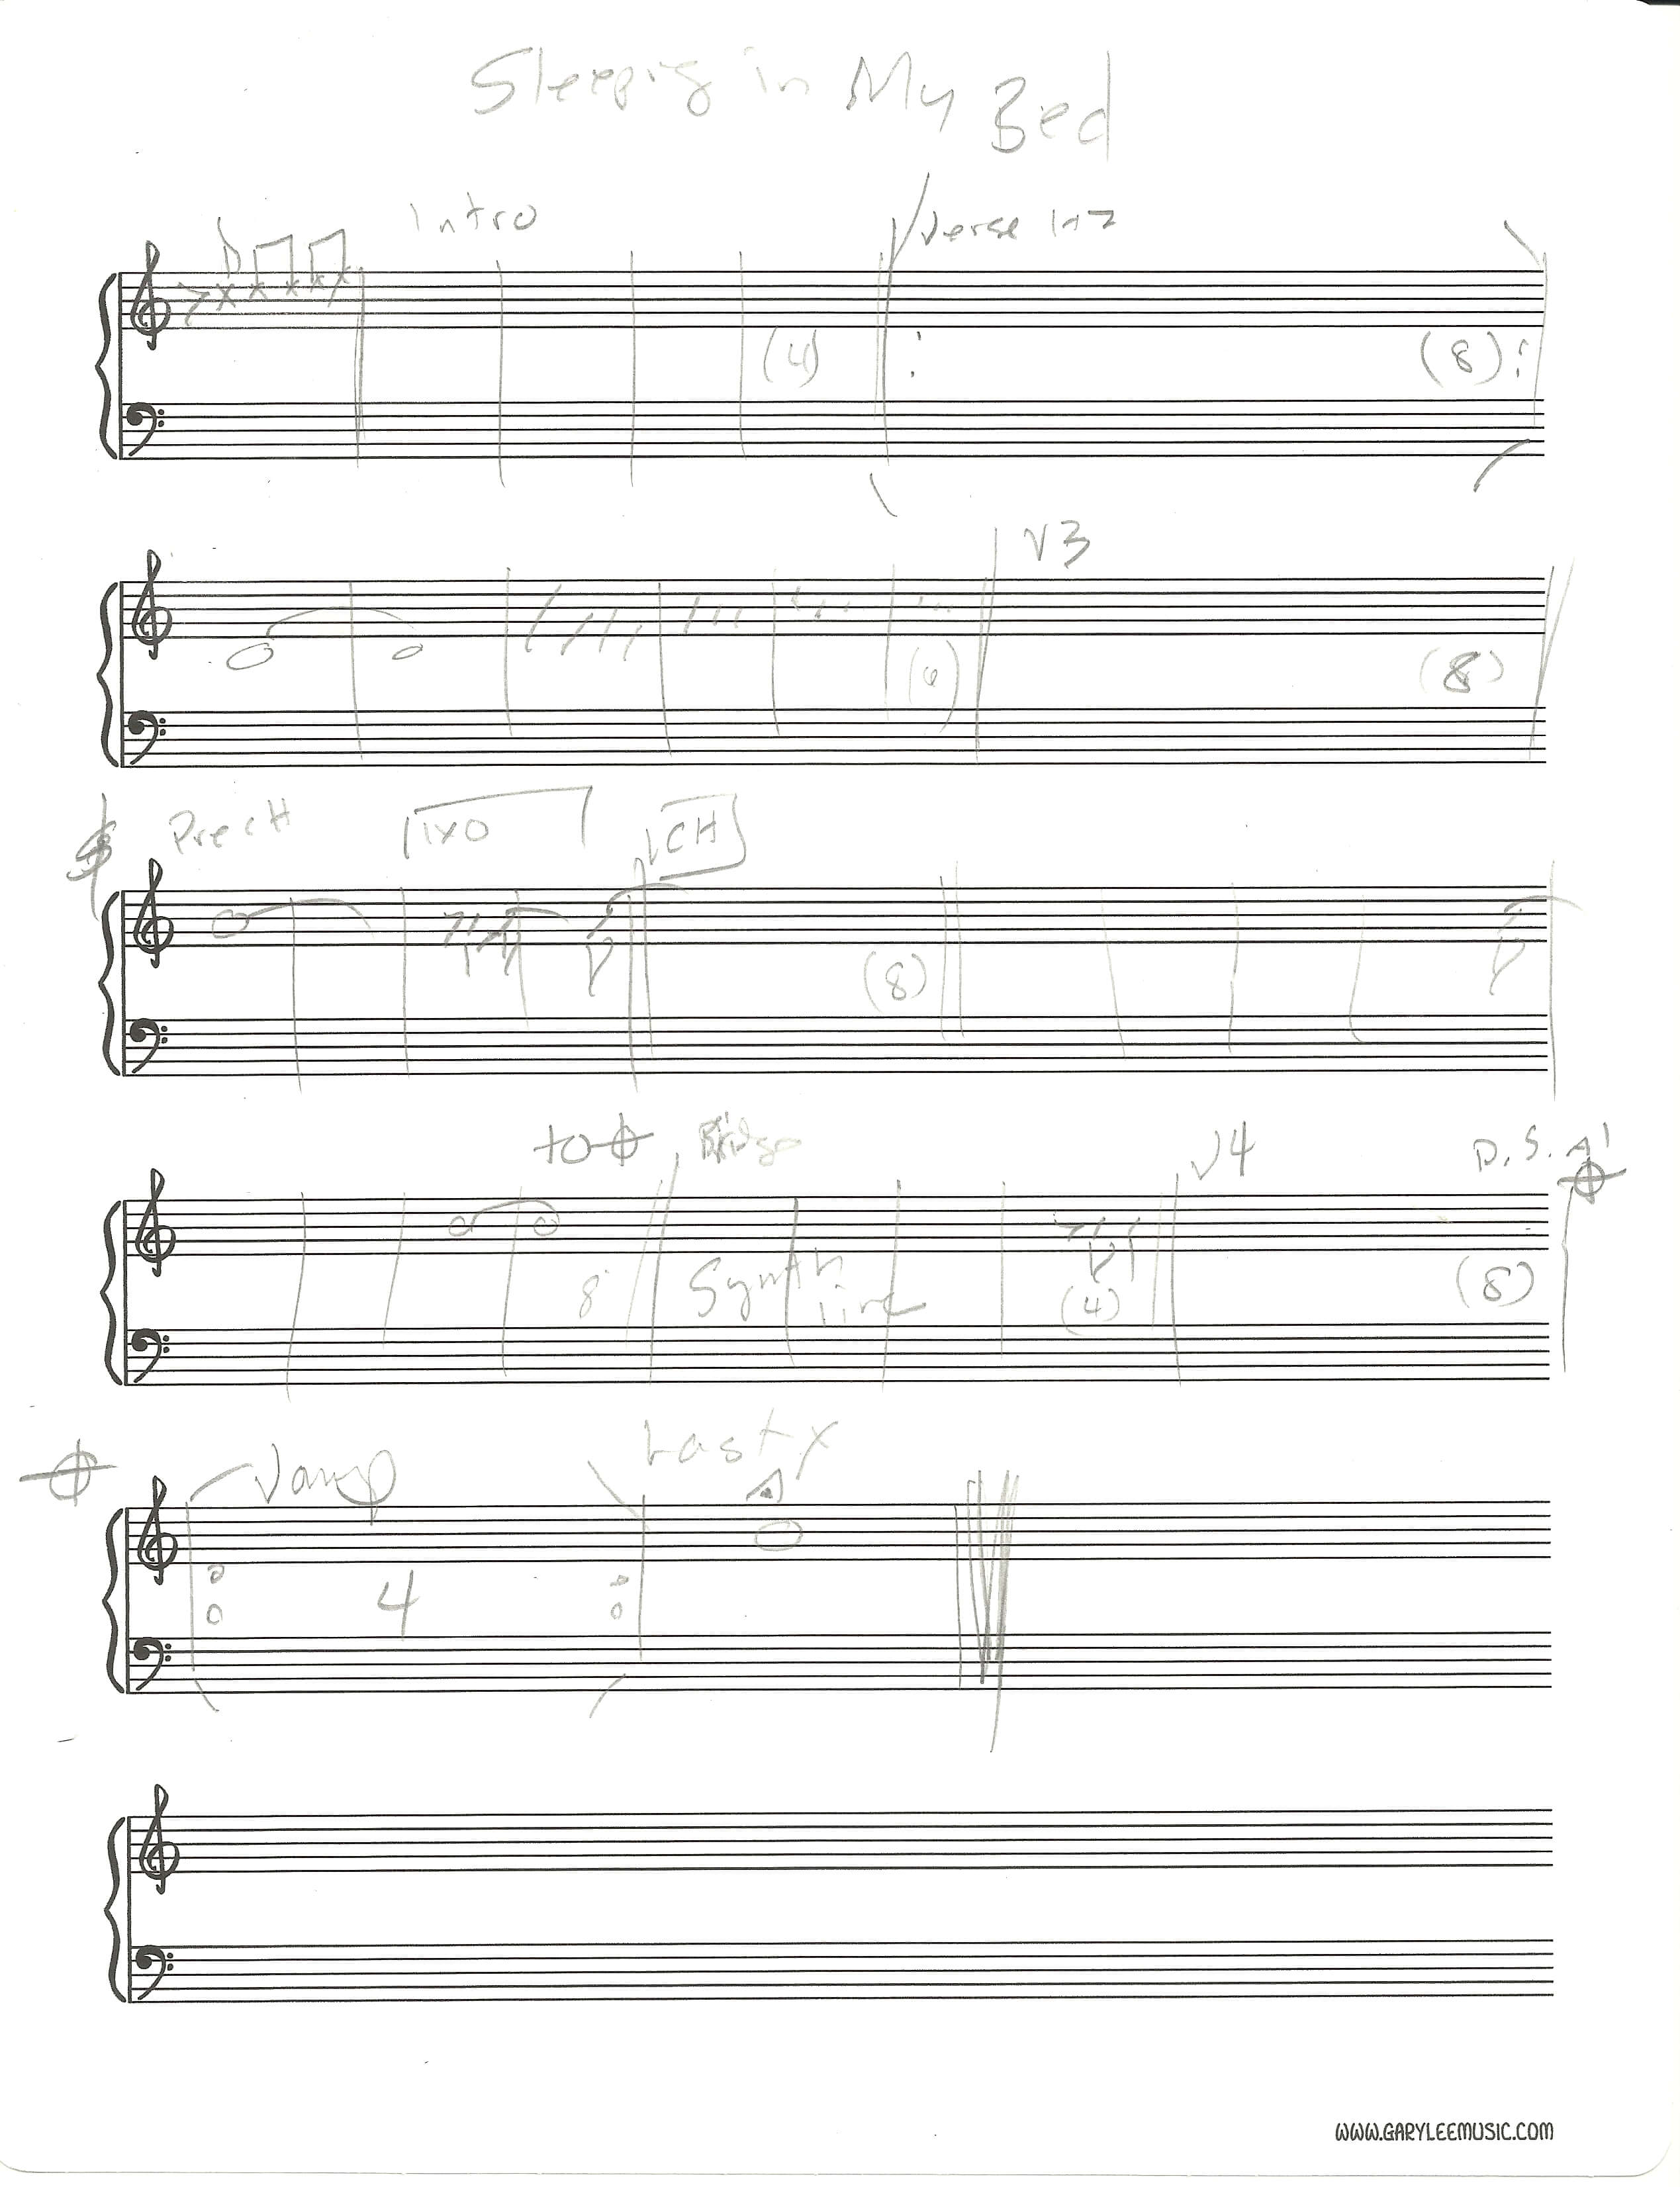 Sheet Music Mplate Time After Piano E2 80 93 Aggelies Online With Blank Sheet Music Template For Word